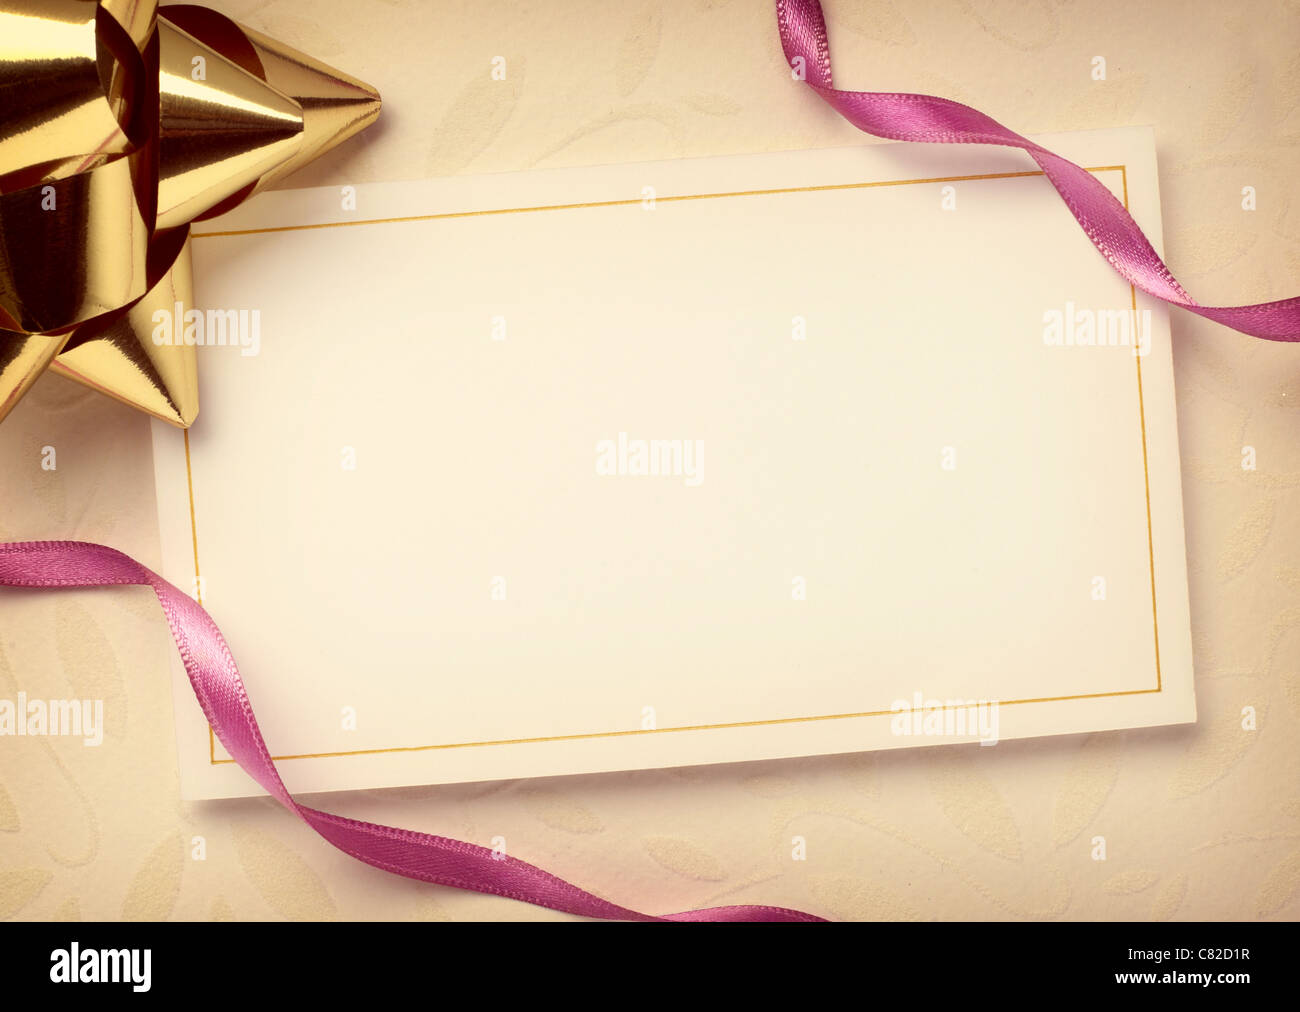 greeting card with ribbon Stock Photo